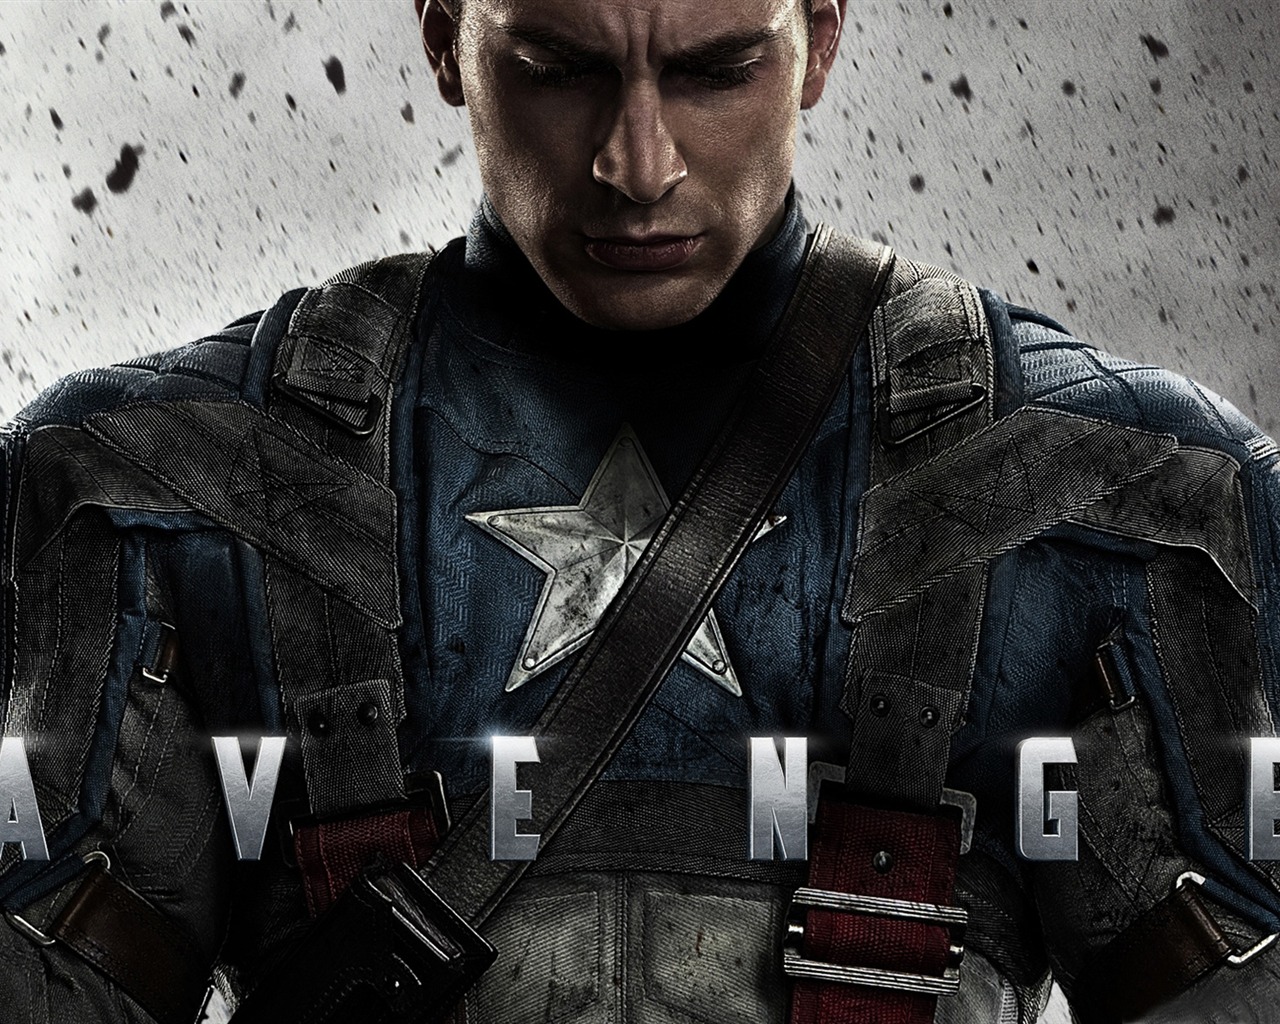 Captain America: The First Avenger wallpapers HD #14 - 1280x1024